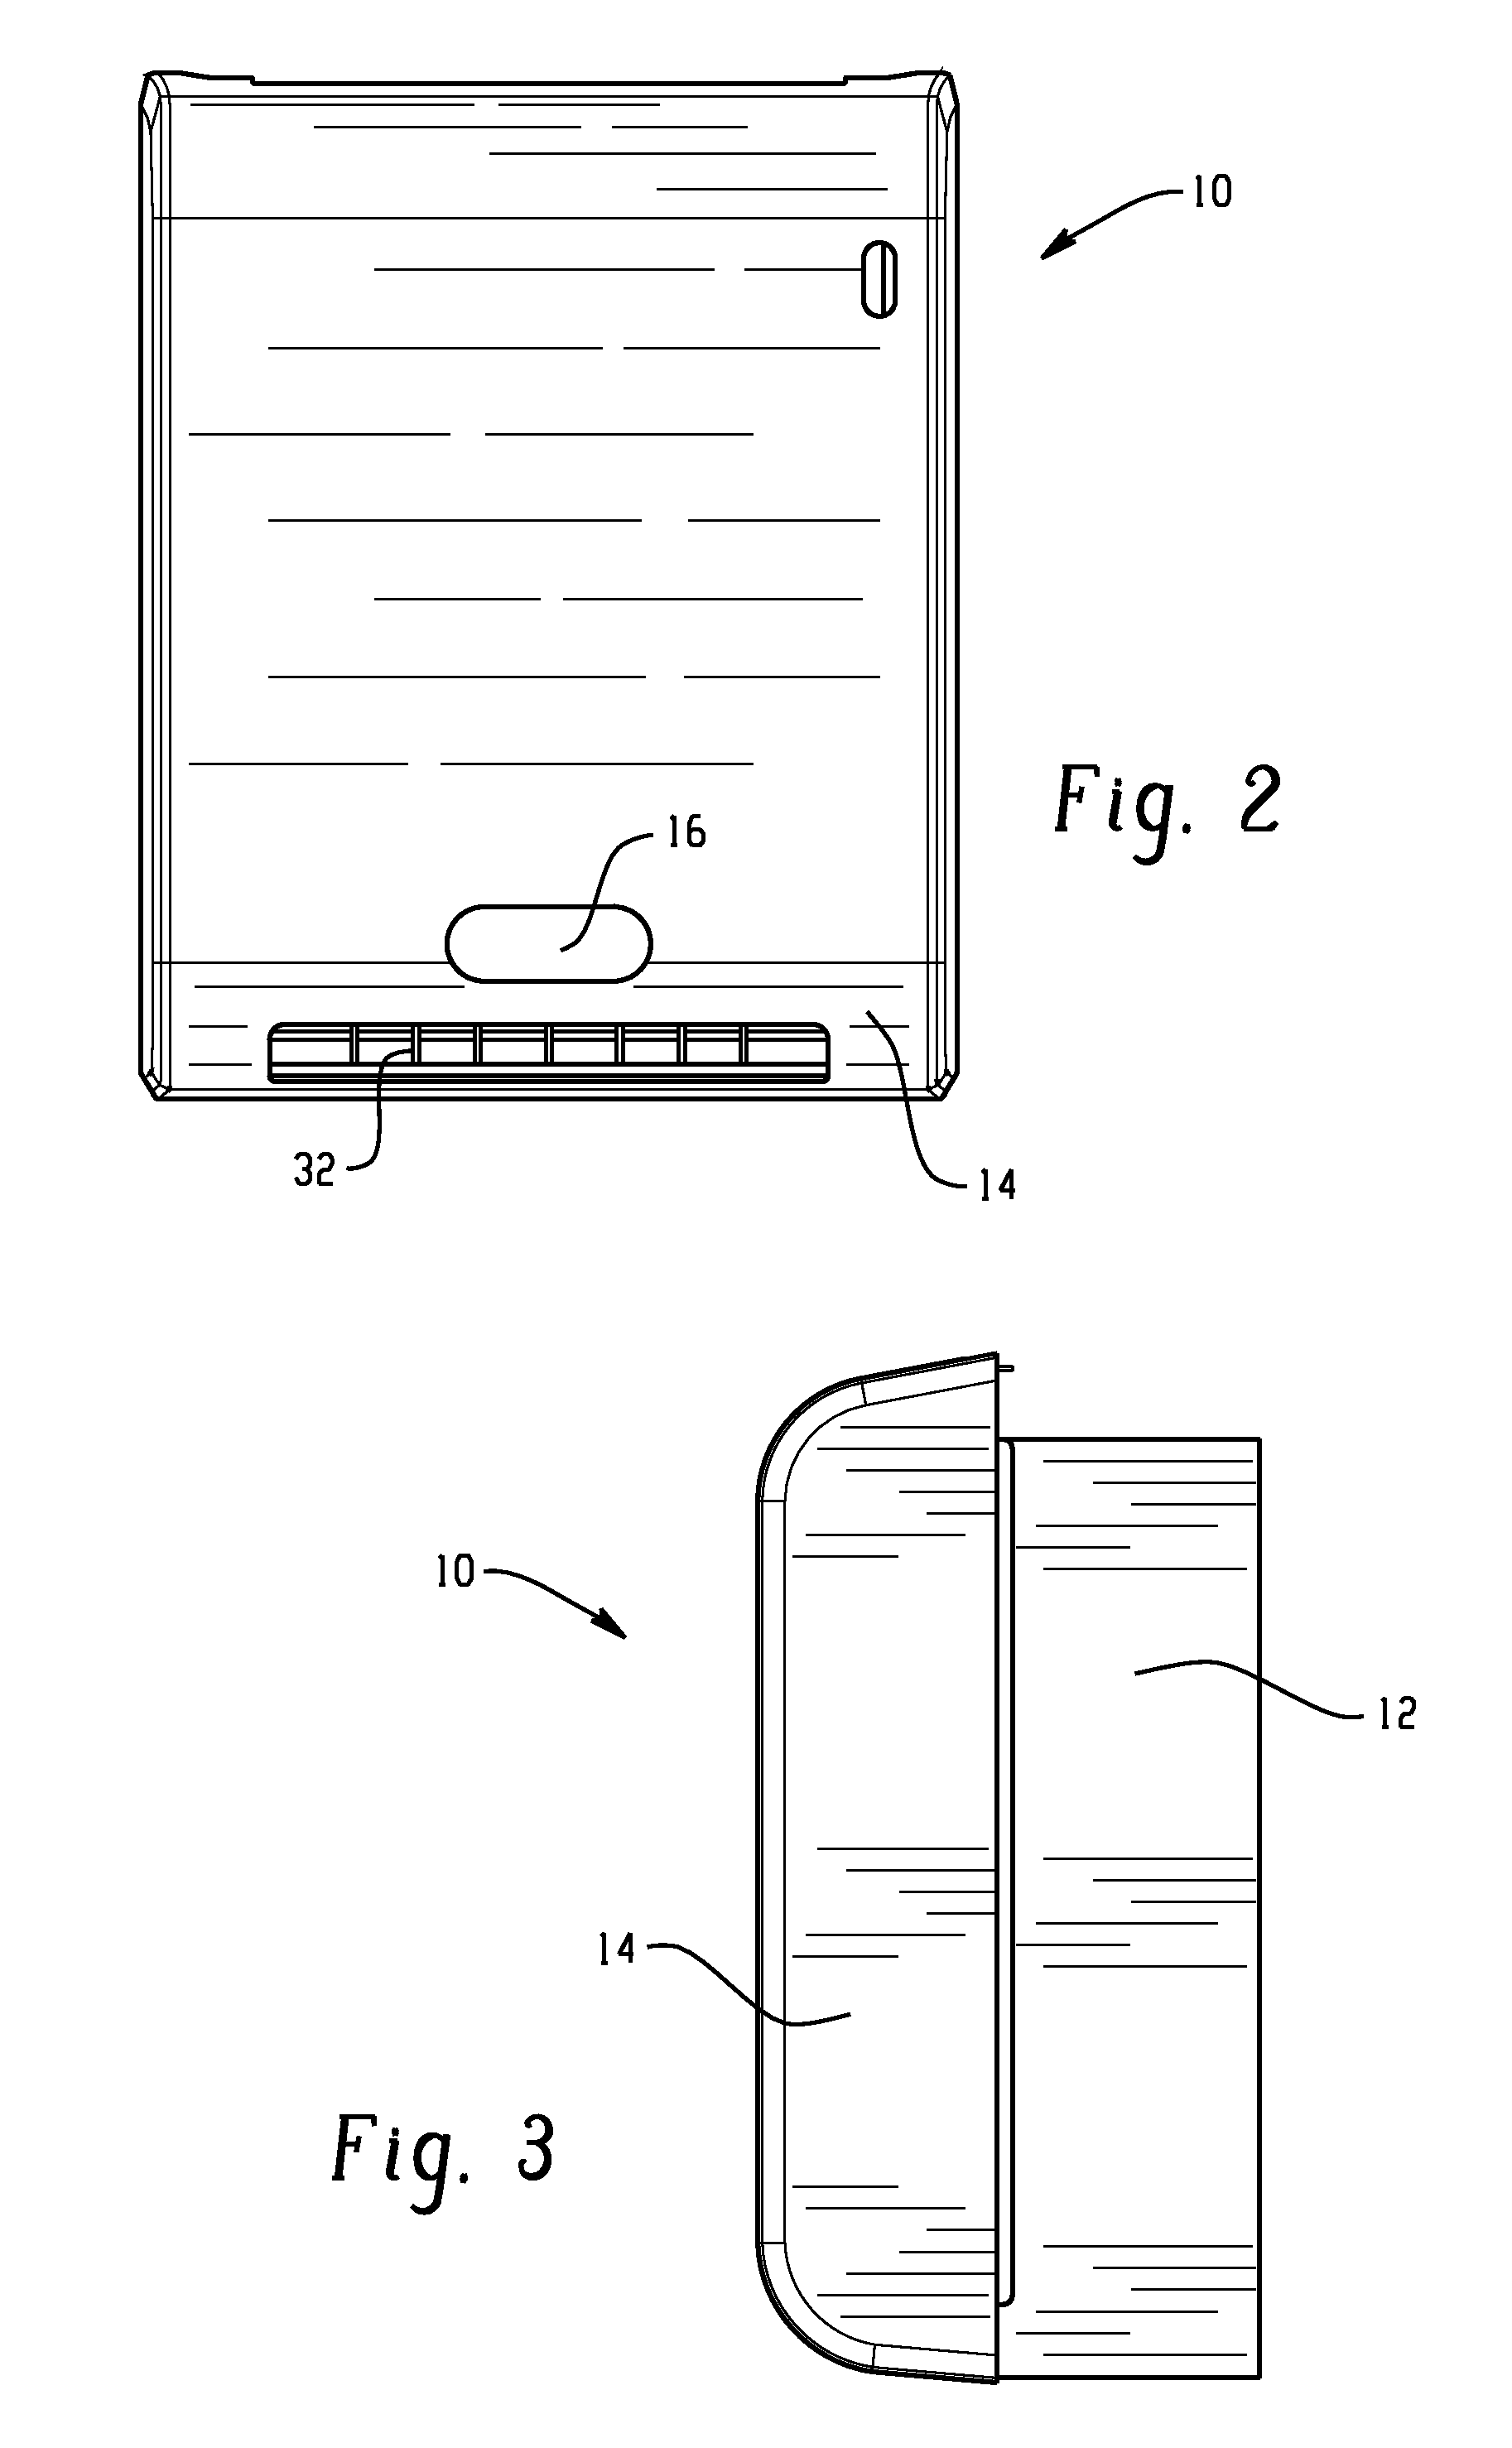 Electronic Dispenser for Dispensing Sheet Products